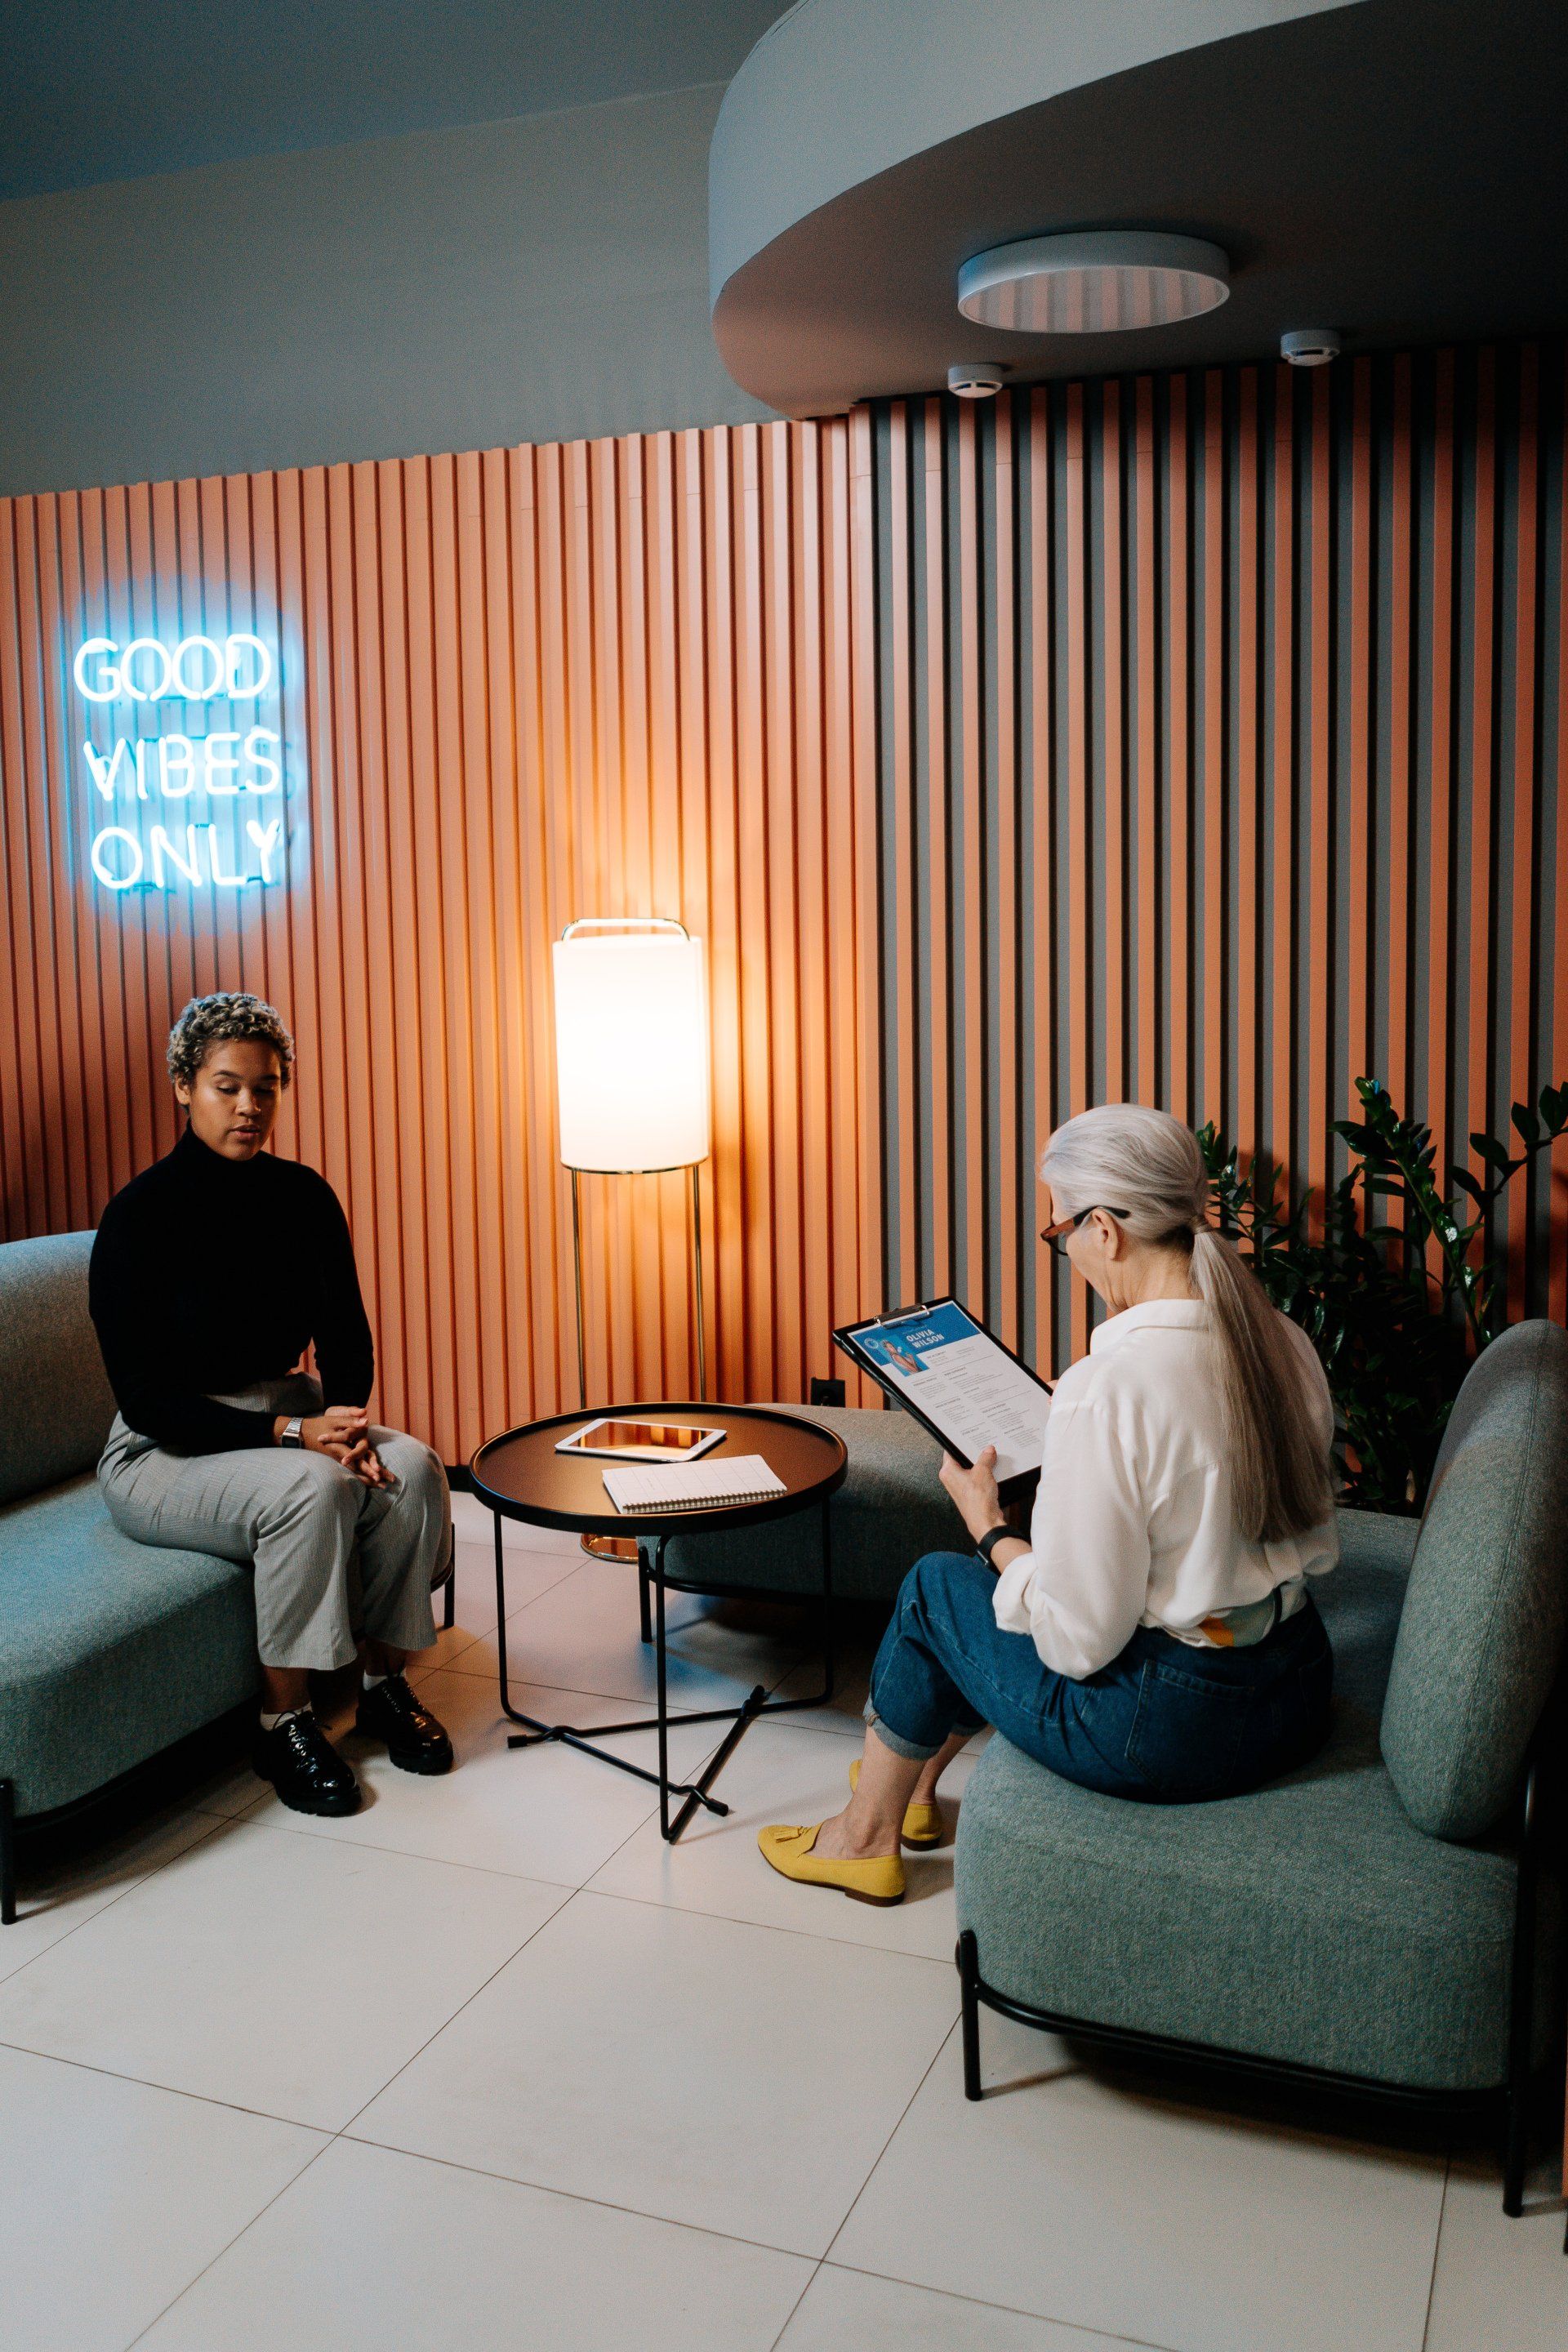 Two women are sitting at a table in a room with a neon sign that says `` good vibes only ''.